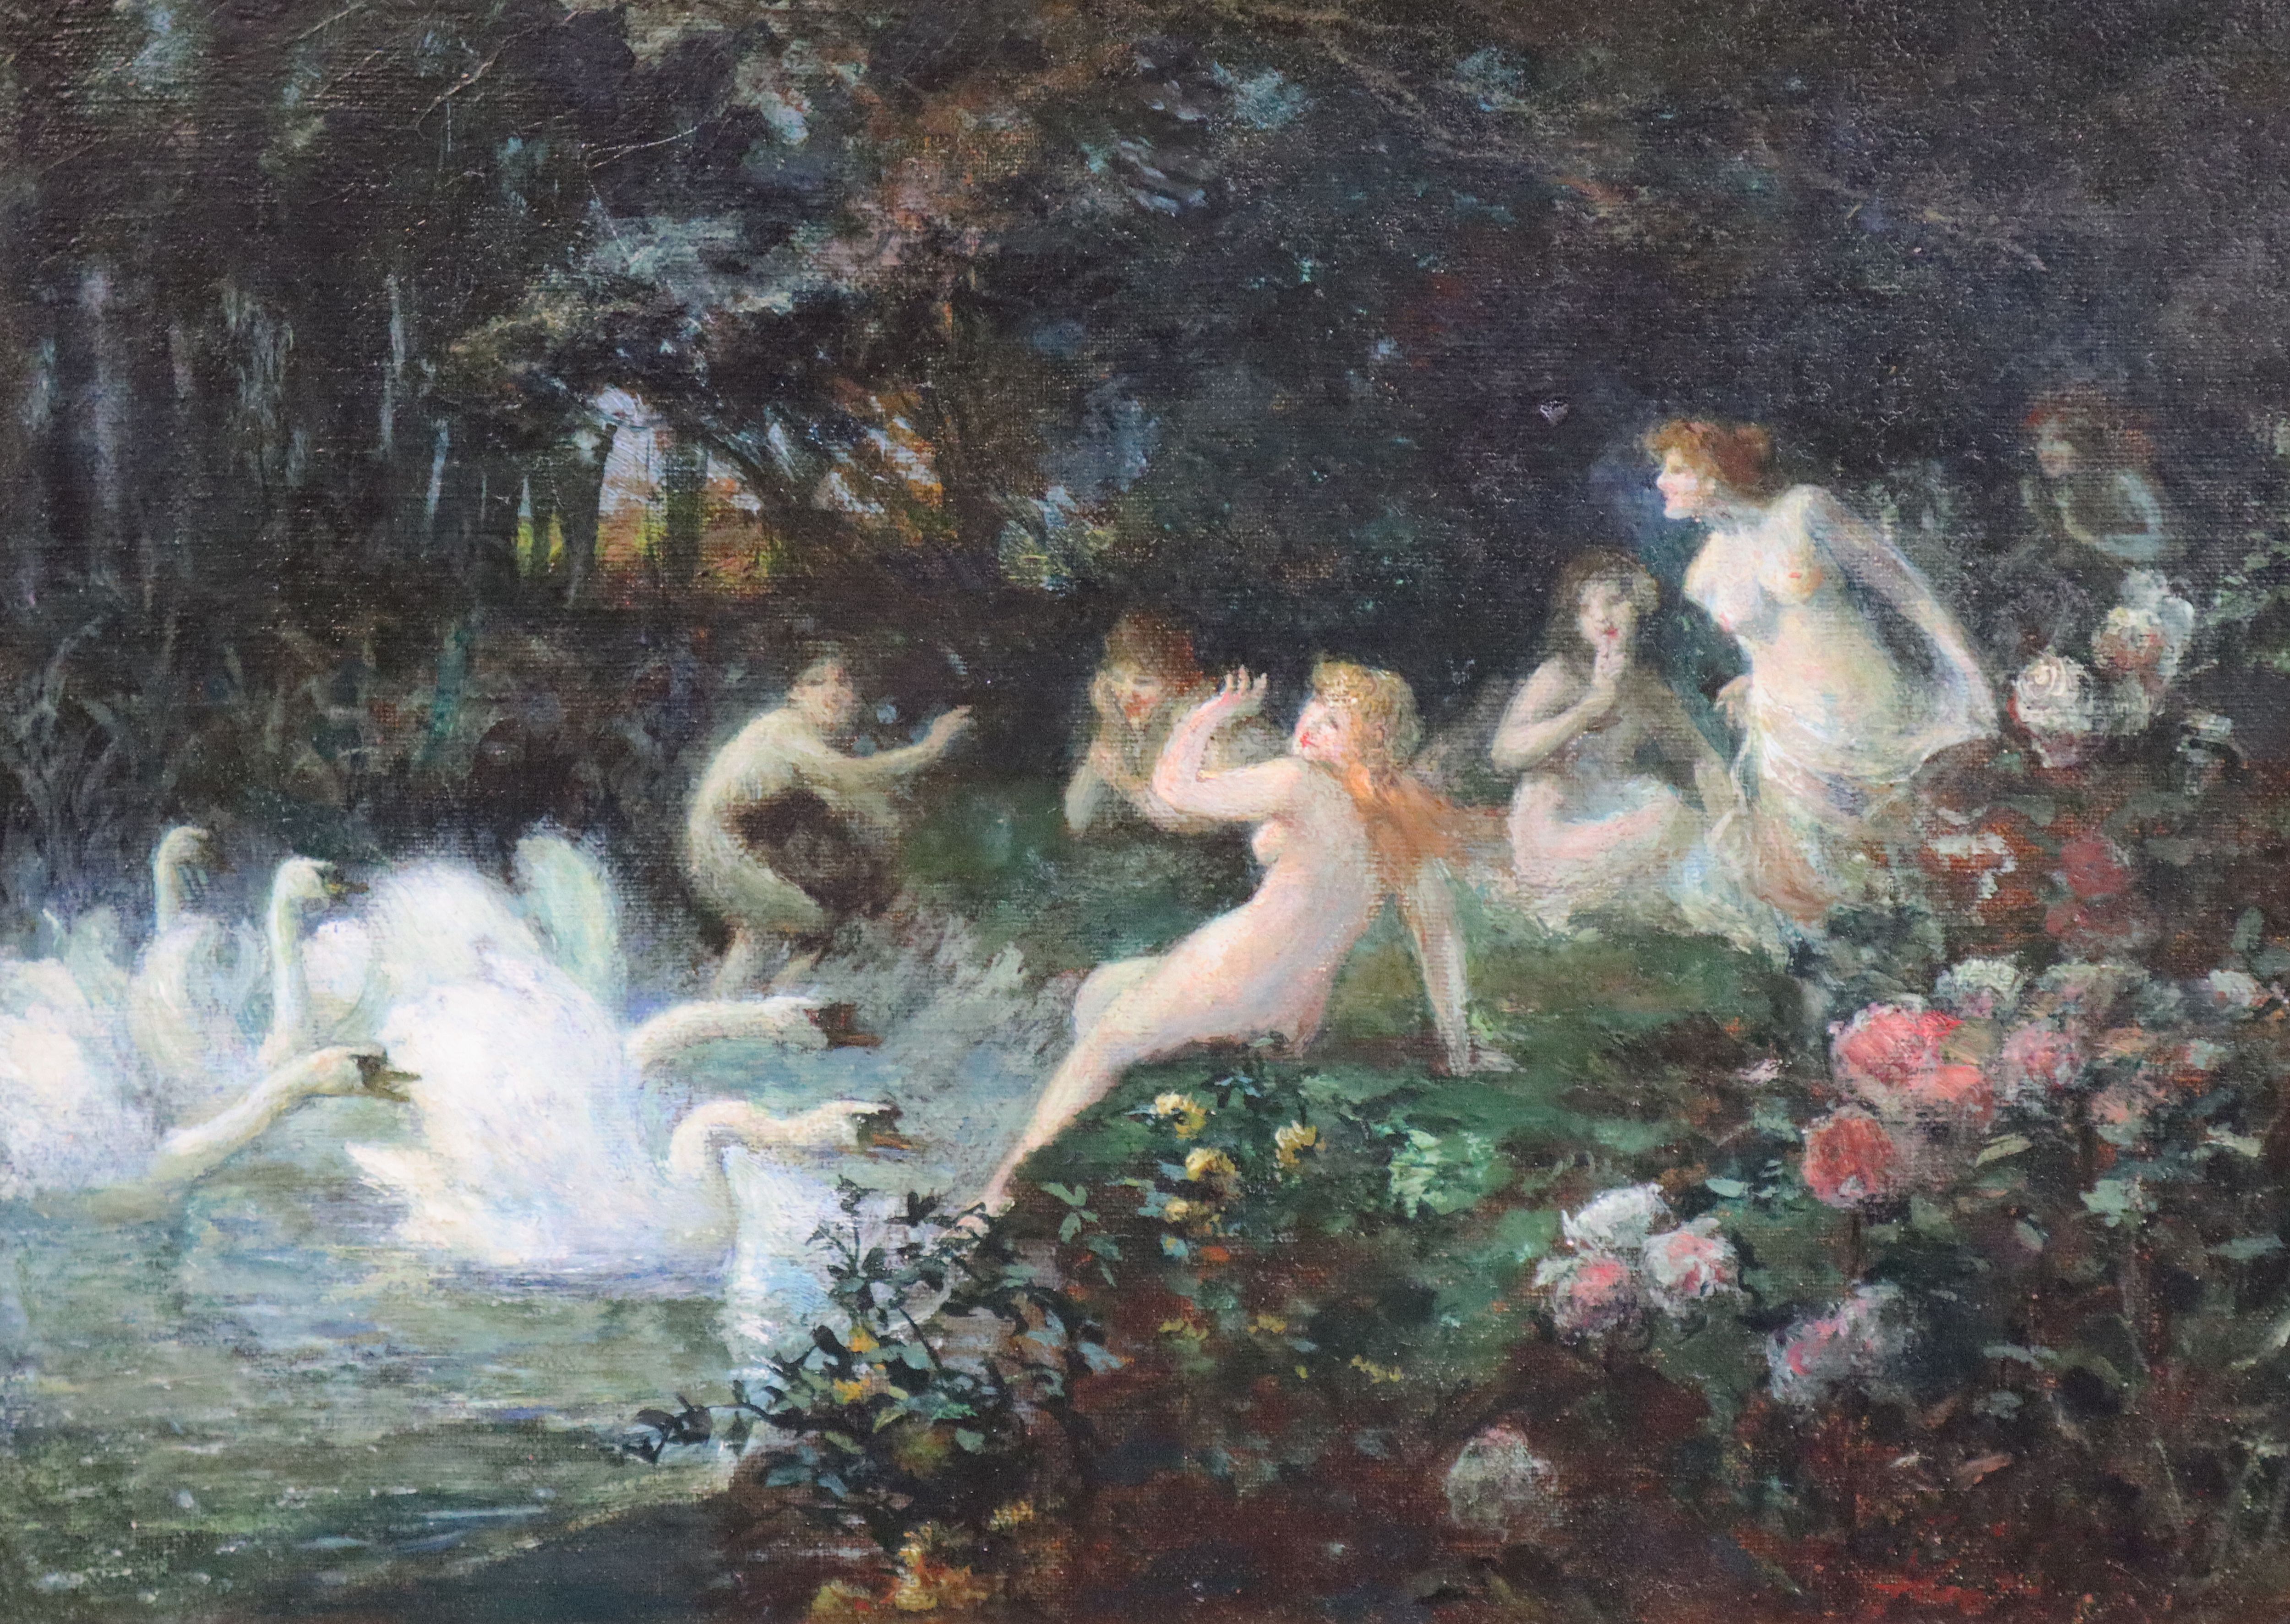 Henri-Théodore Fantin-Latour (French 1836-1904) Symbolist Nymphs being chased by swans 9.5 x 13.5in.